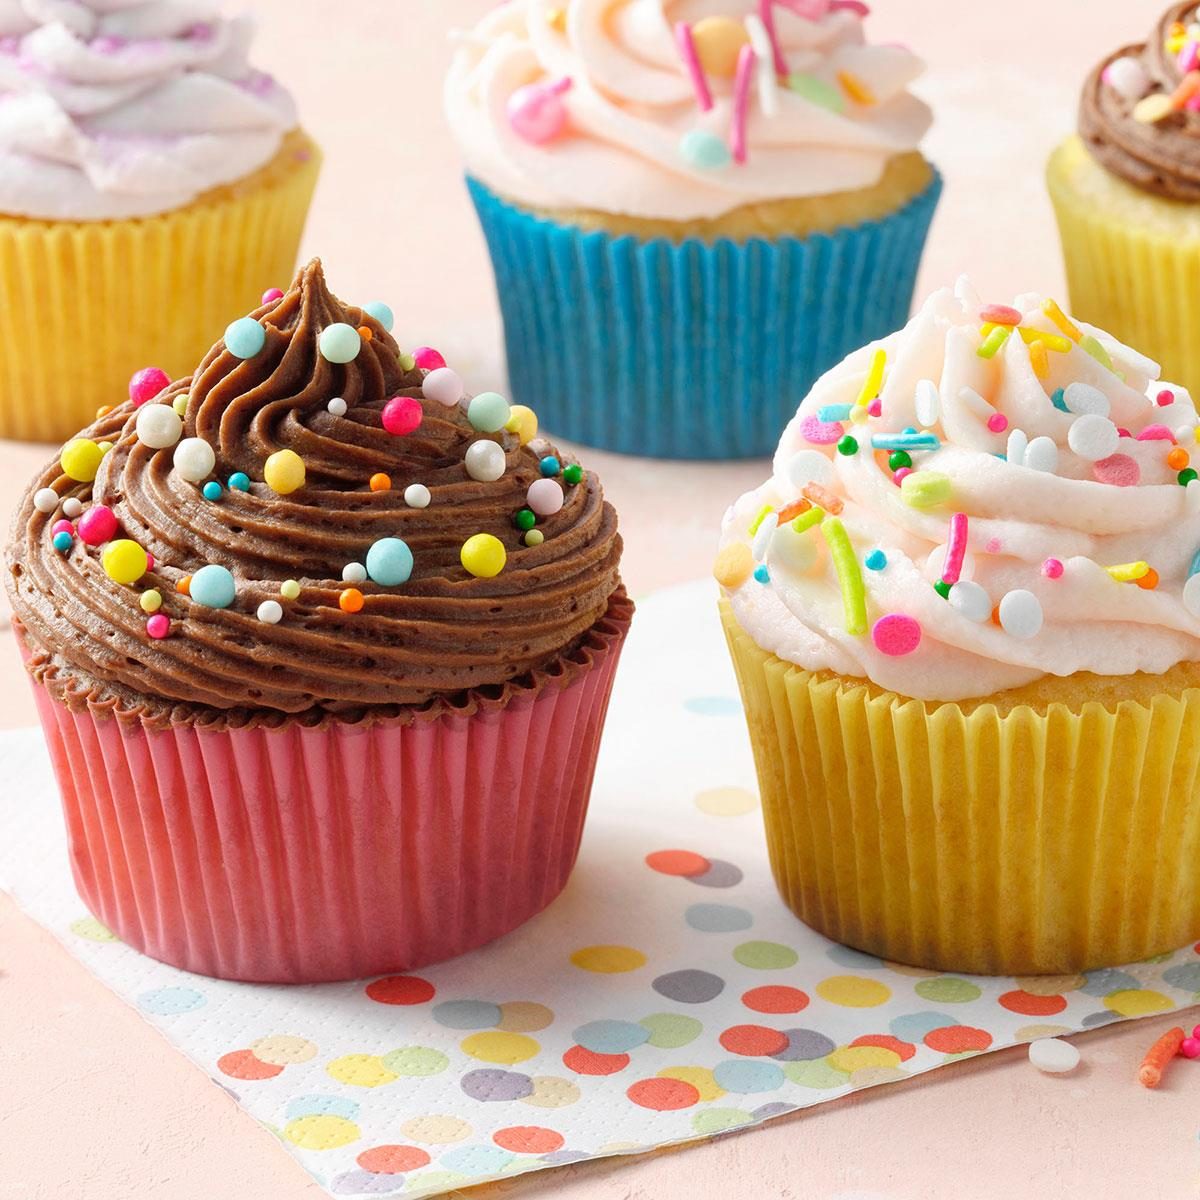 Yellow Cupcakes Recipe: How to Make It